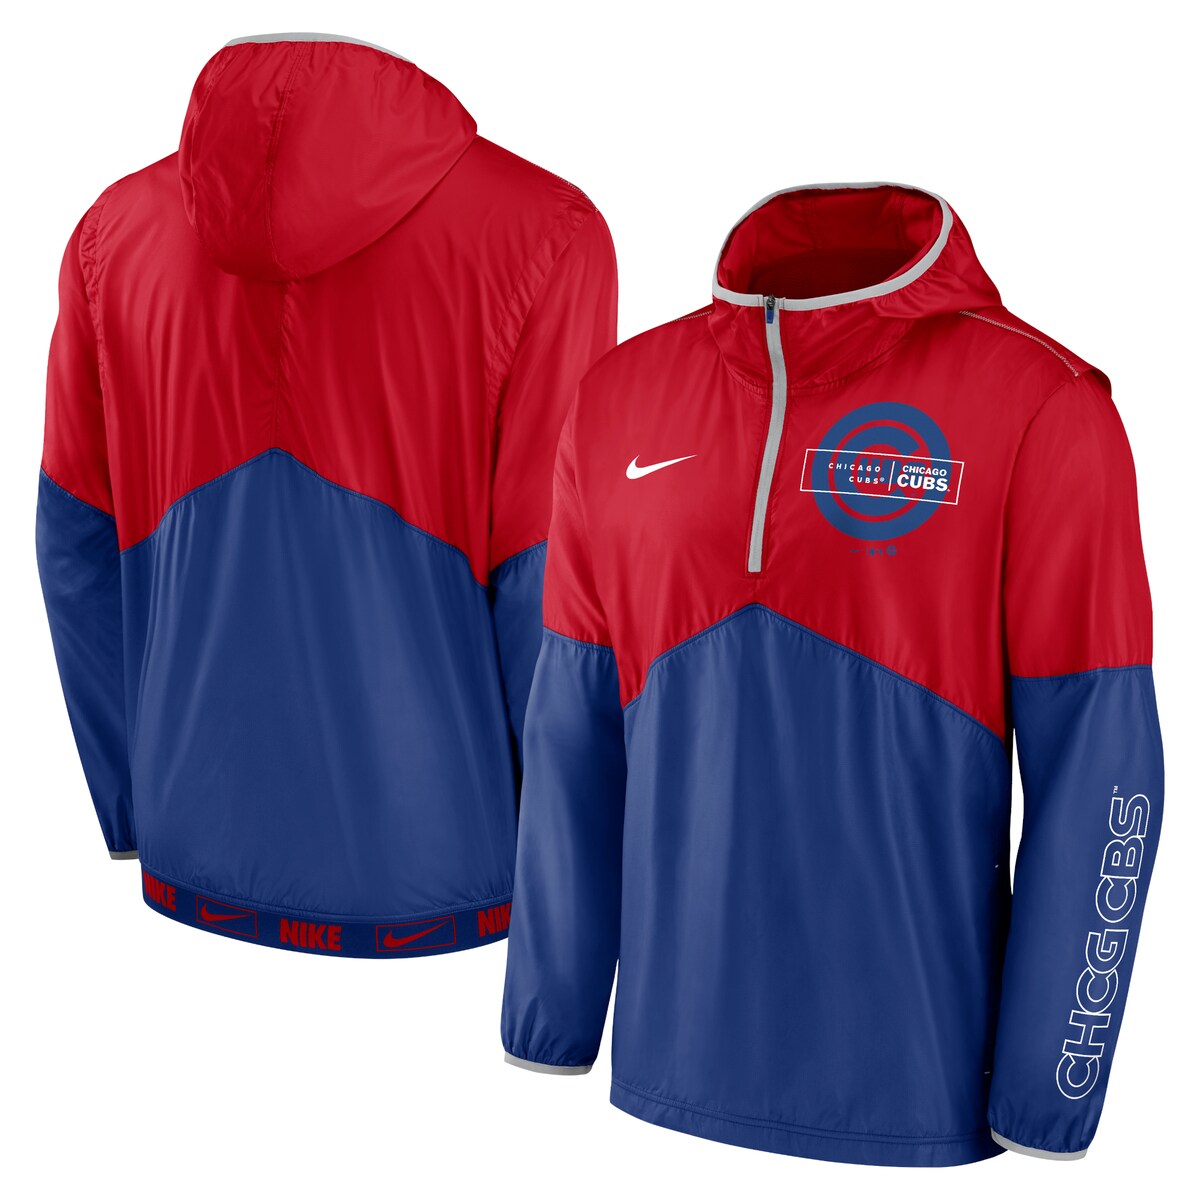 Grab some Chicago Cubs gear fit for the great outdoors with this Nike Overview jacket. Along with a ventilated back and lightweight design for optimal breathability, the ripstop fabric adds durability during extreme conditions. Best of all, the vibrant colorway and powerful Chicago Cubs graphics enhance your spirit and pride in your favorite MLB team.Material: 100% PolyesterLong sleeveLong sleeveVentilated back panel with mesh liningHalf-zipScuba hood without drawstringMachine wash, tumble dry lowPulloverOfficially licensedWoven design on back hemSilicone screen print graphicsLightweightMesh-lined front pouch pocketImportedBrand: NikeRipstop fabricElastic trim on hood, cuffs and back hem